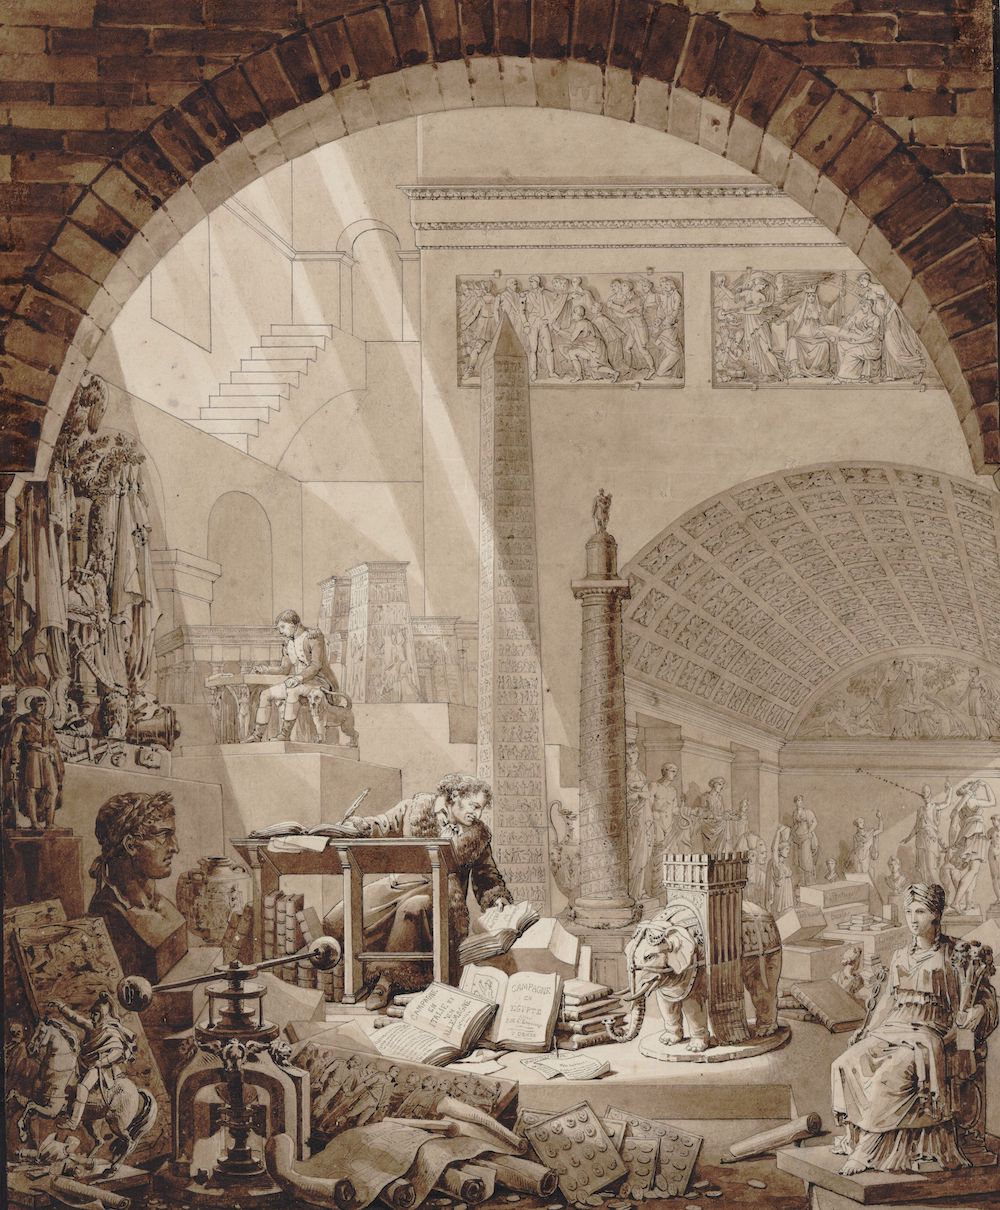 An illustration shows Dominique-Vivant Denon working surrounded by the antiquities seized by Napoleon in his campaigns.